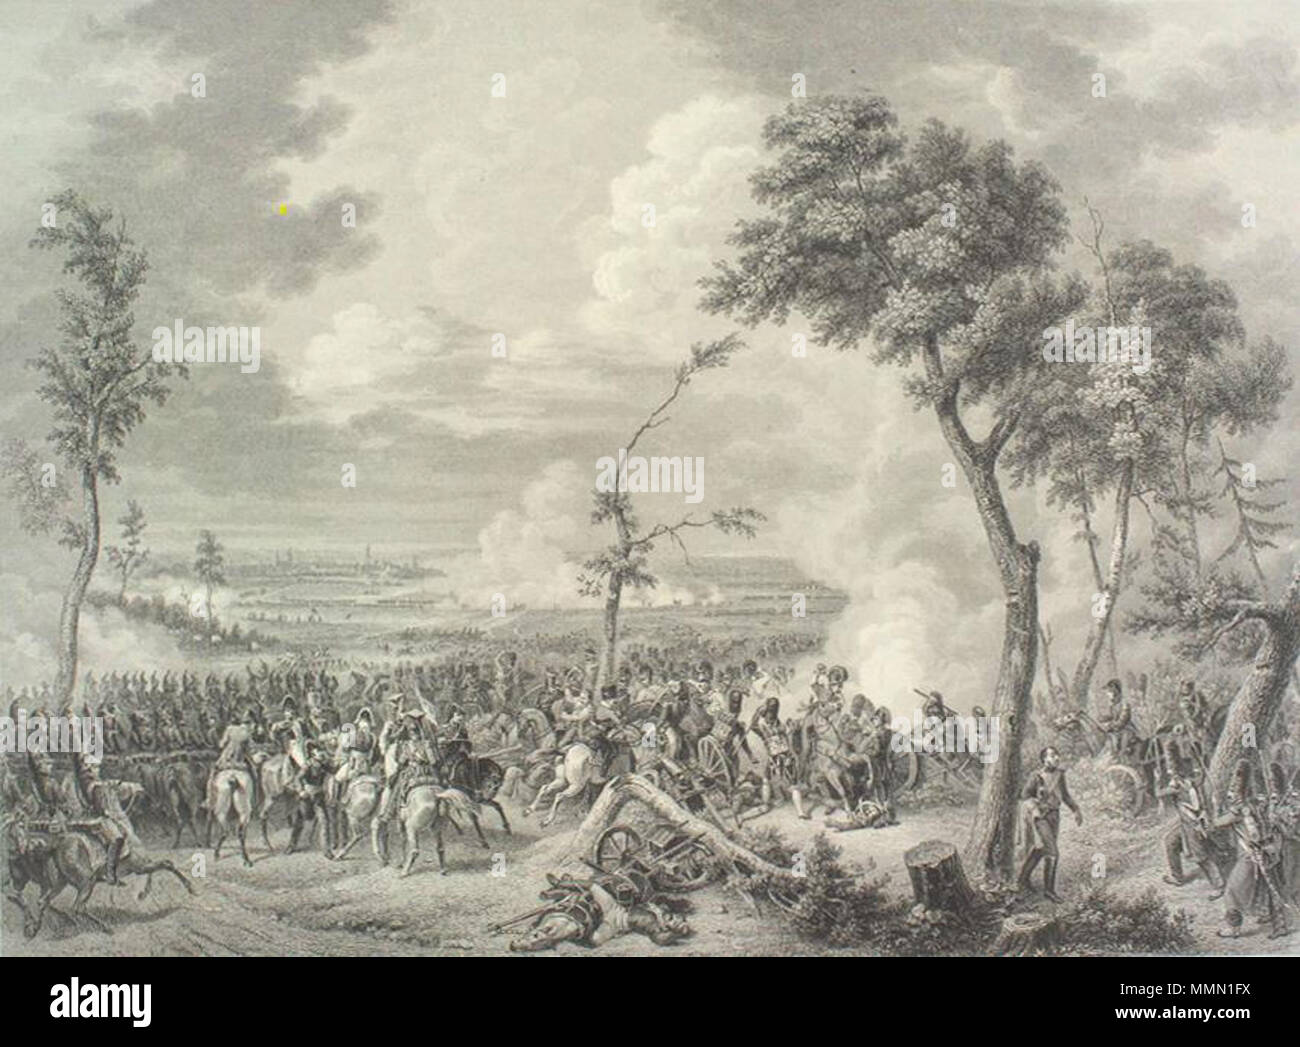 Battle of Hanau (October 30, 1813). The Campaign of Leipzig forced Napoleon  to retire to the west of the Rhine, in the course of which the French  defeated a force of